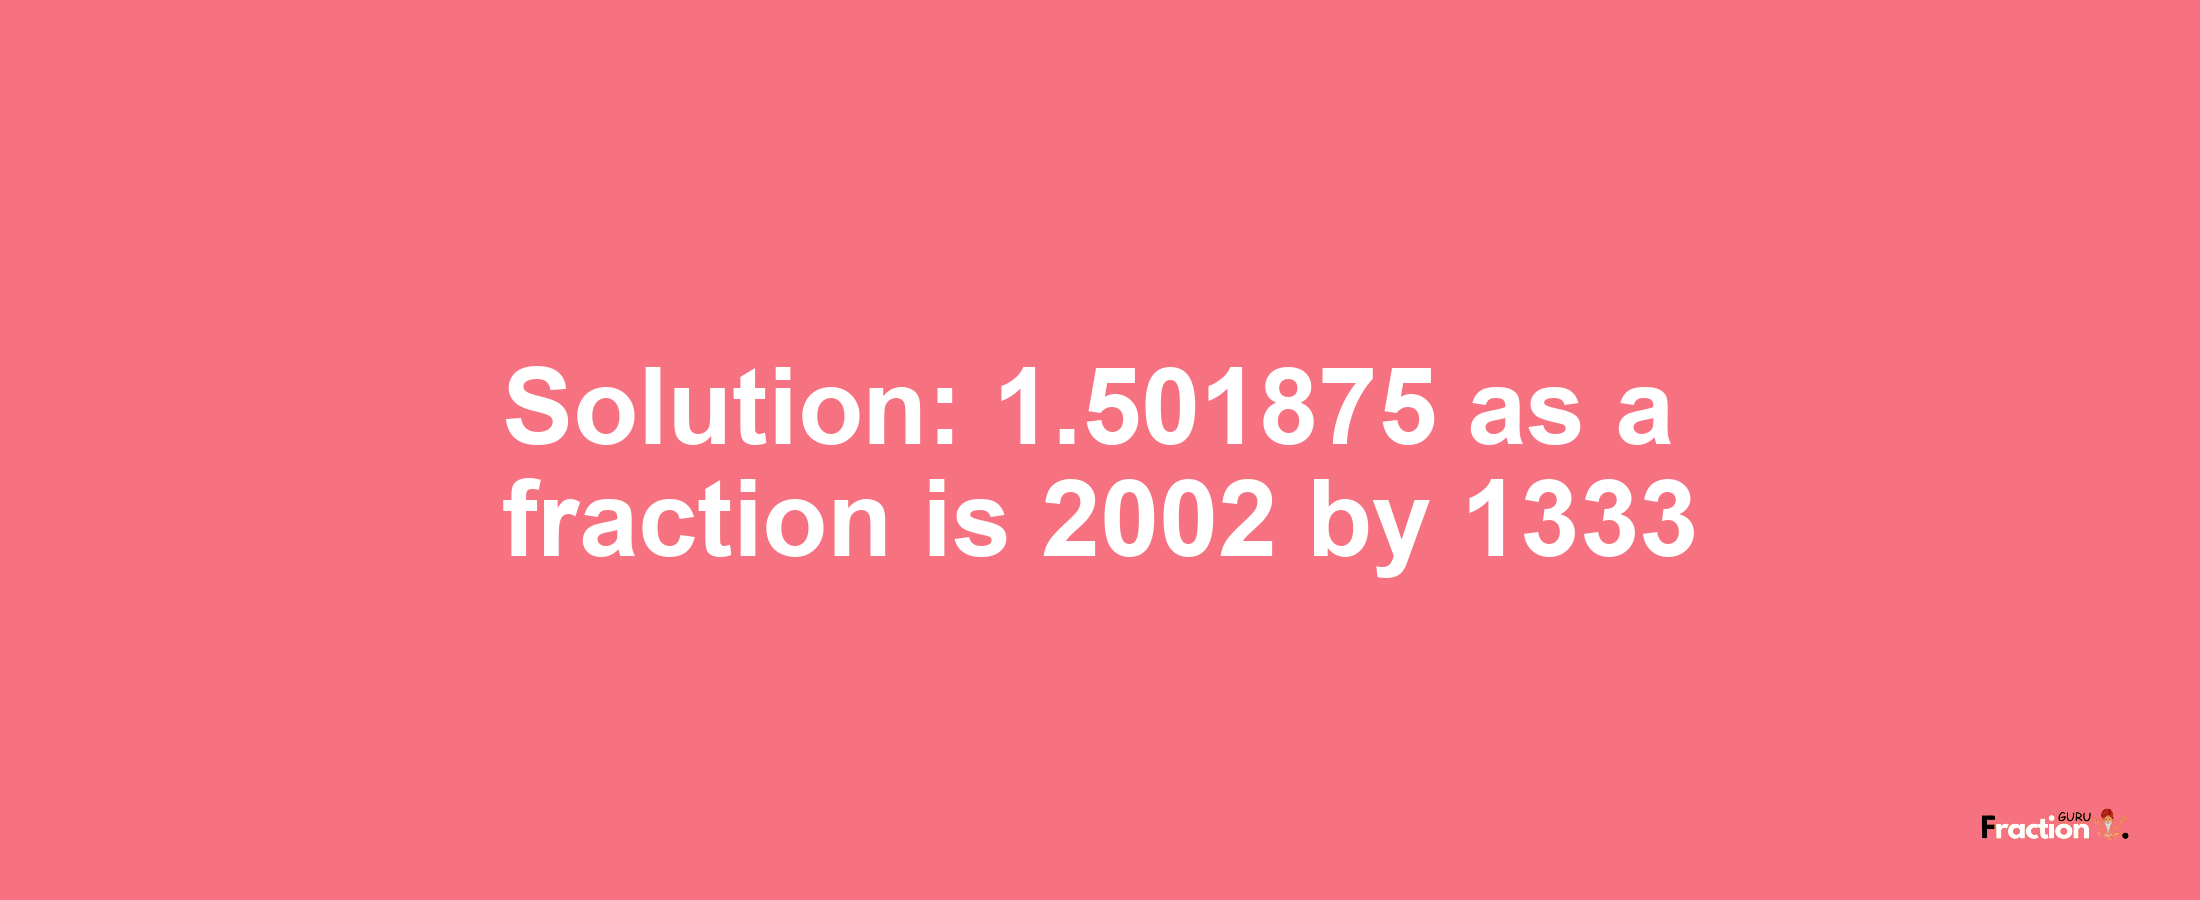 Solution:1.501875 as a fraction is 2002/1333